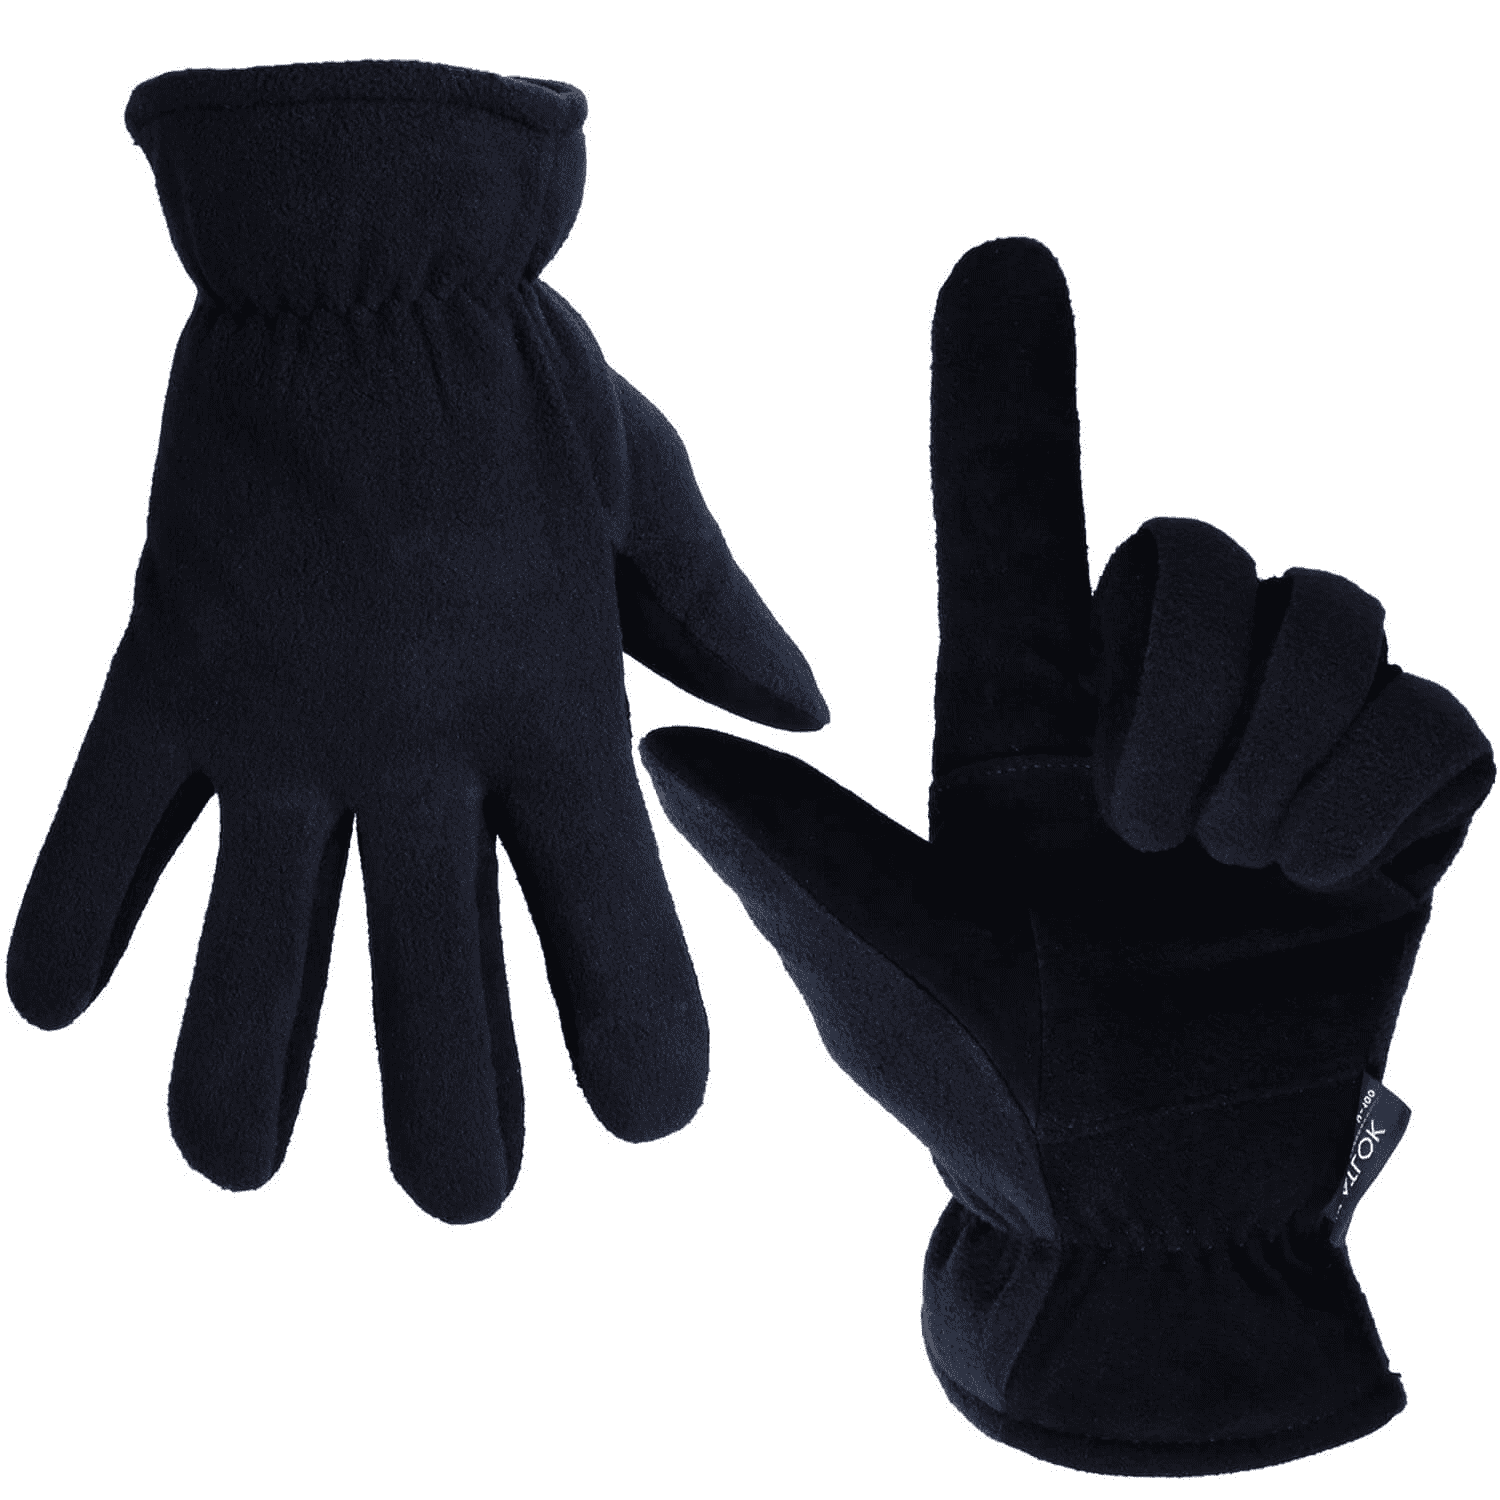 OZERO Winter Workwear Safety Gloves for Men Women -20°F in Cold Weather